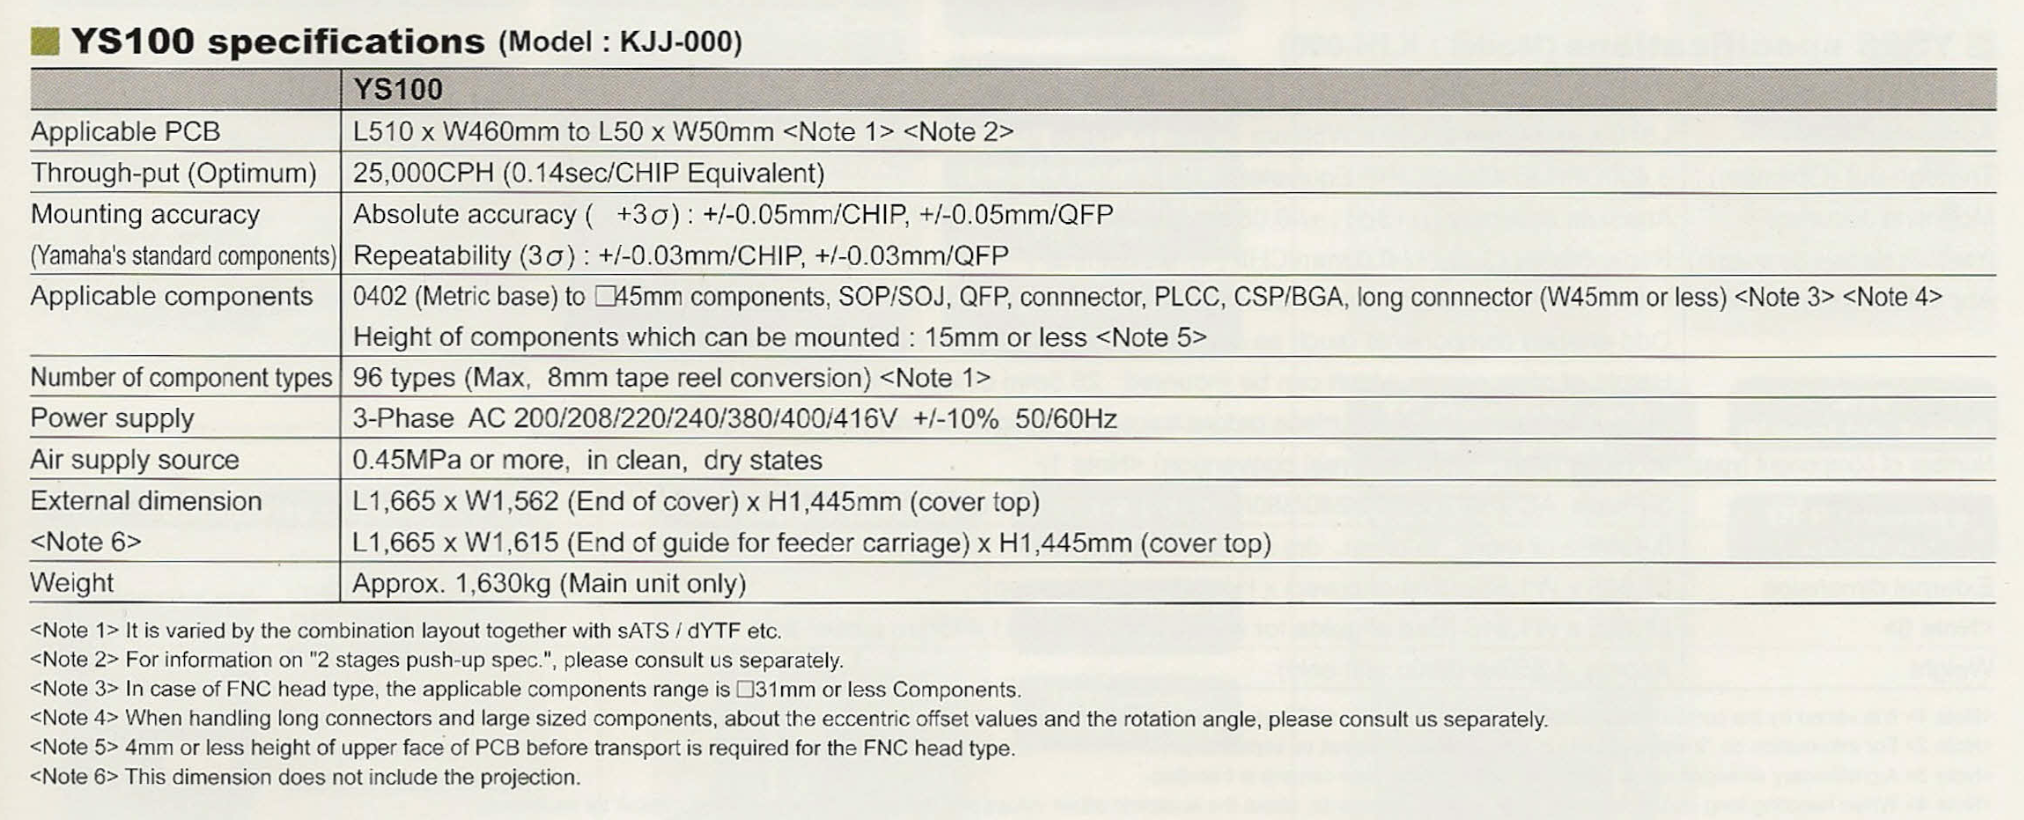 YS100 specifications